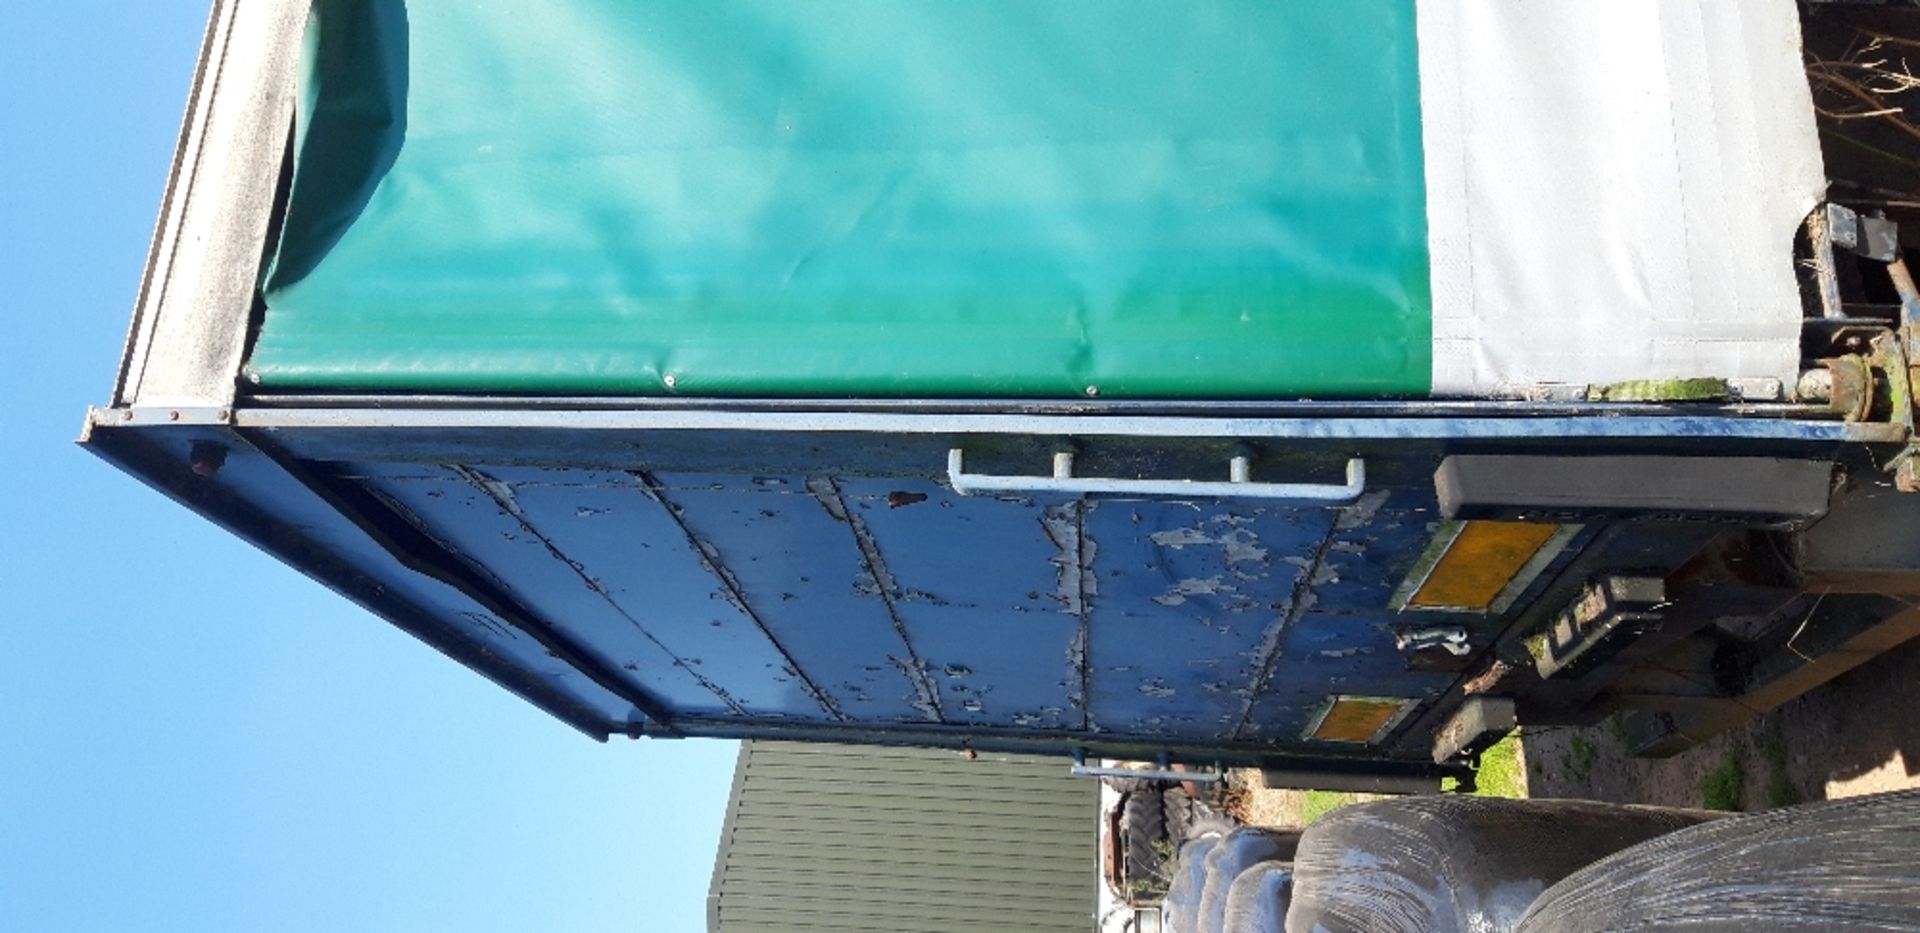 SINGLE AXLE CURTAIN SIDED TRAILER - Image 3 of 5